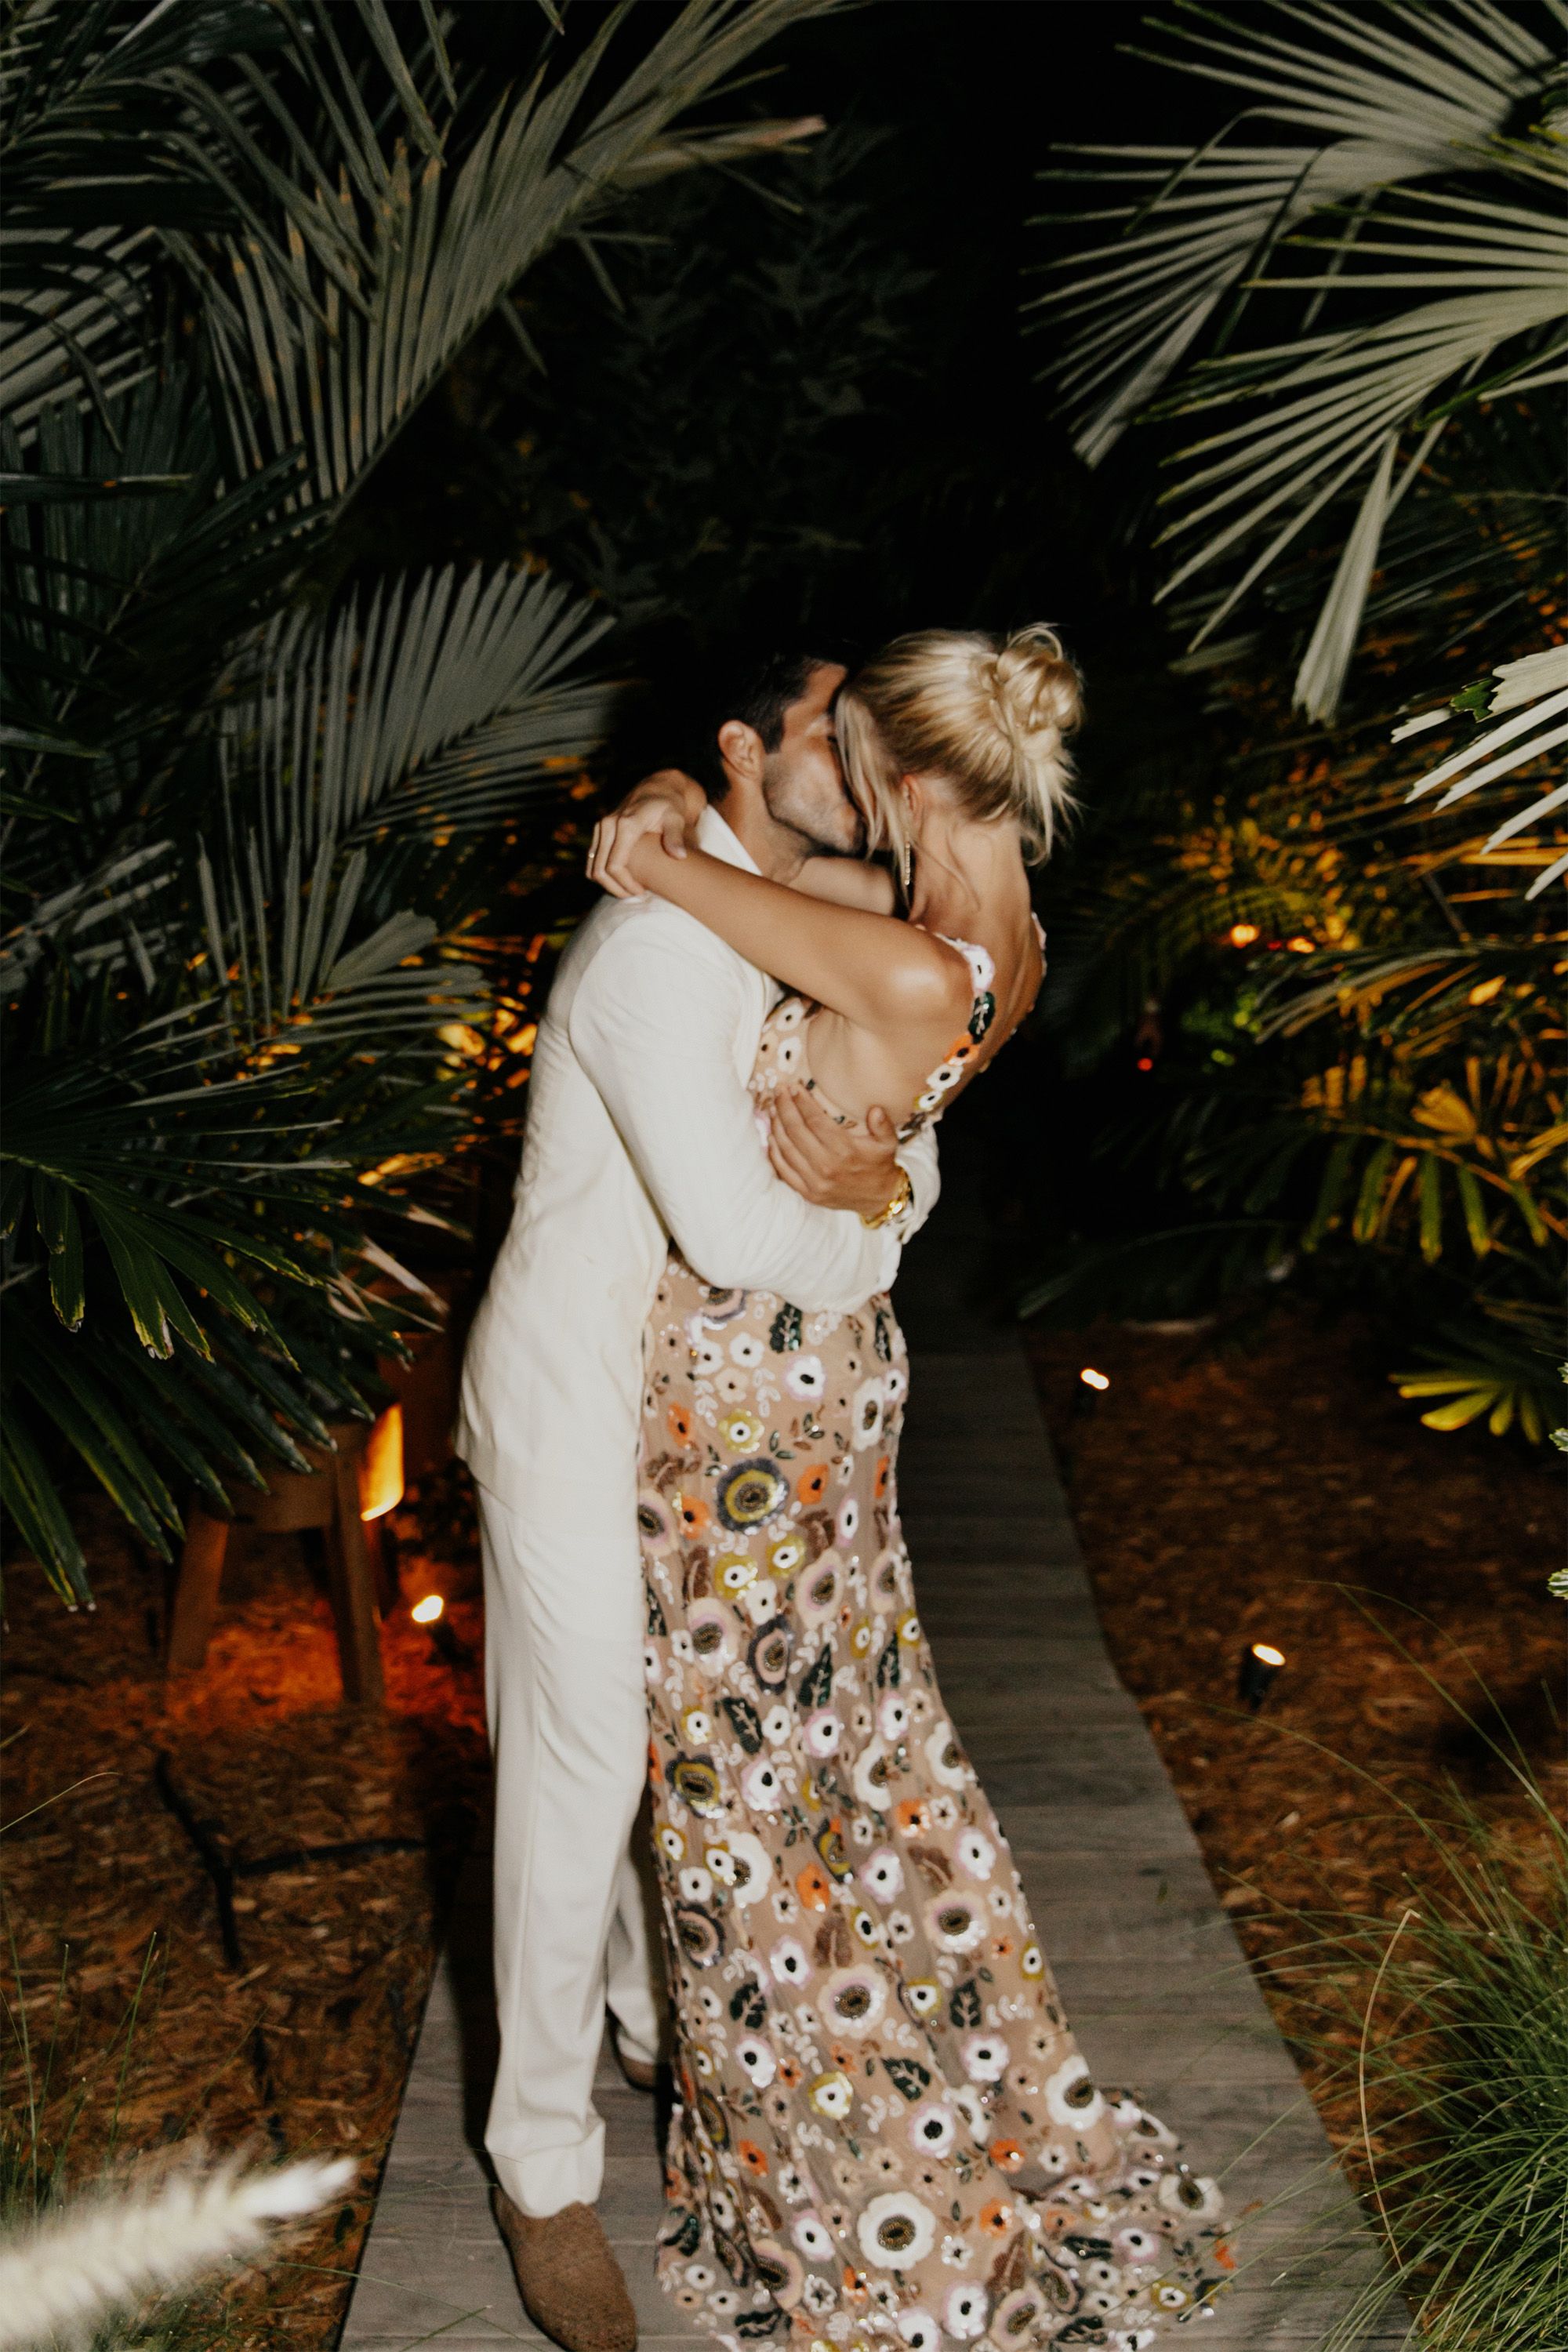 A Dreamy and Intimate Wedding in St. Barth's - The Planning Society